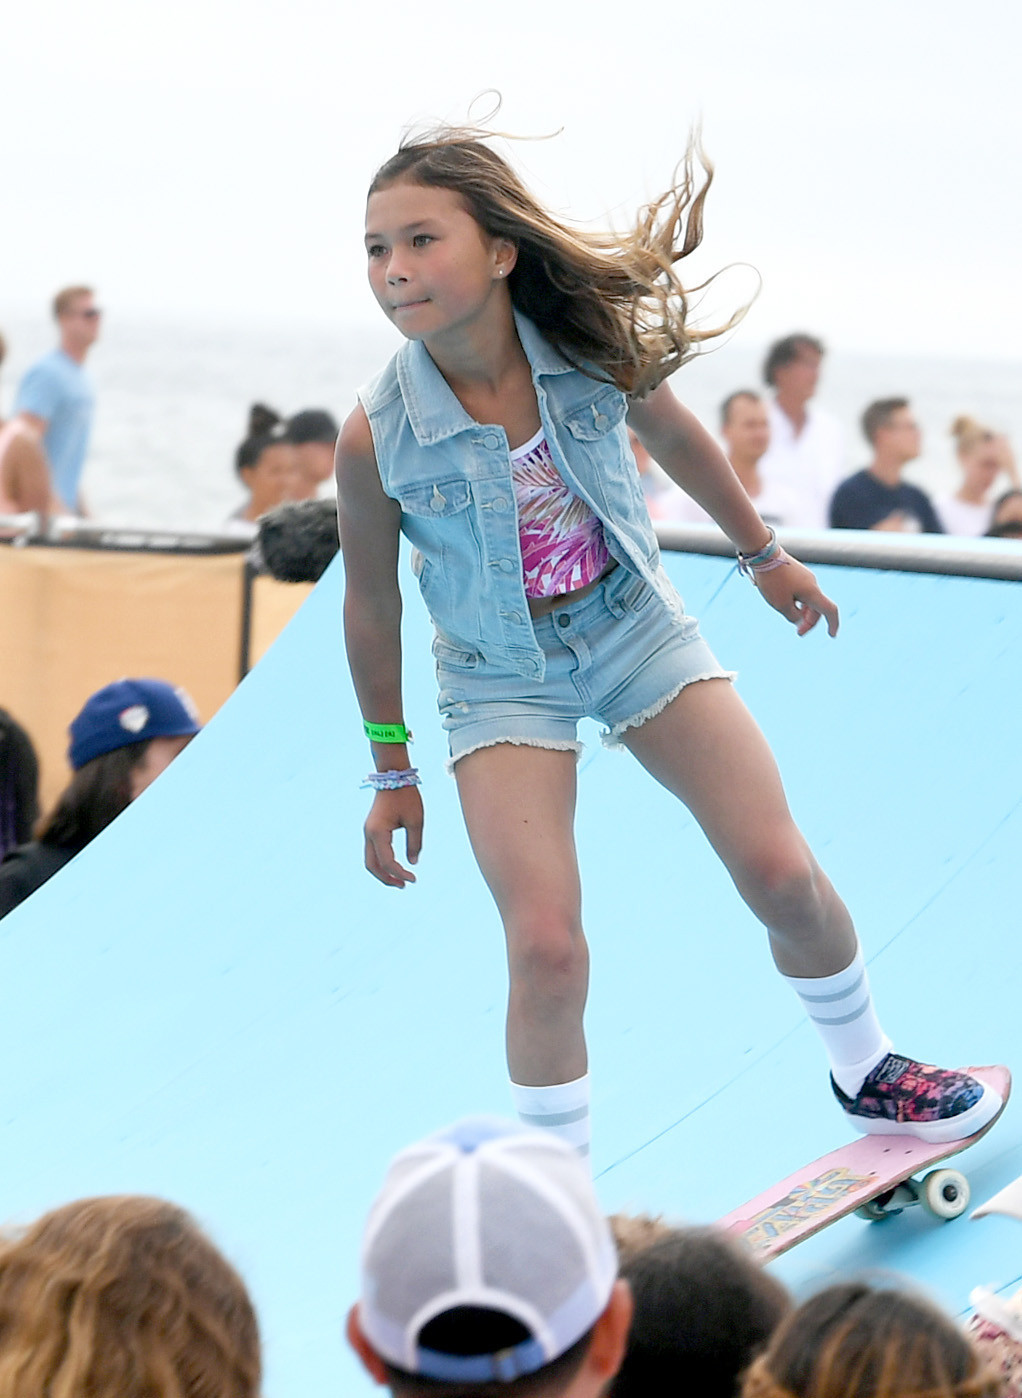 Sky Is The Limit For 11 Year Old Skateboarder Looking Beyond The Olympics